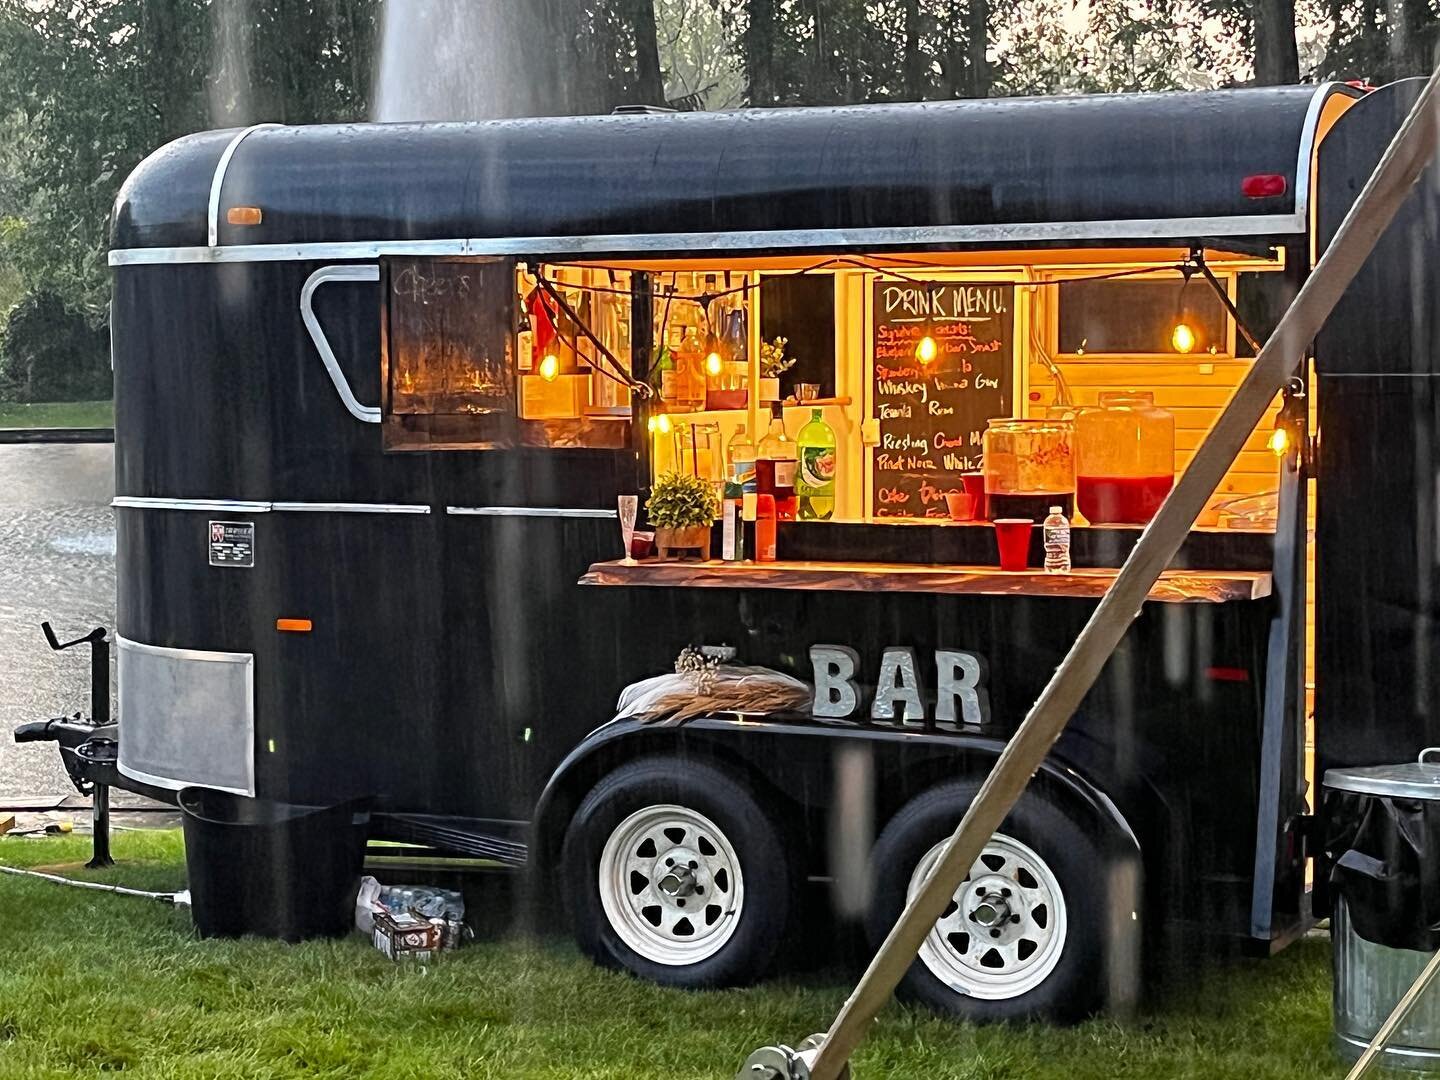 It got a little wet during the event last night, and I can&rsquo;t get over how cozy (and dry, minus the outdoor chalkboard/decor!) the Pebble was looking. 😌🤩

#mobilebar #mobilebarsinthewild #weddingreception #horsetrailerconversion #dinnerbreak #